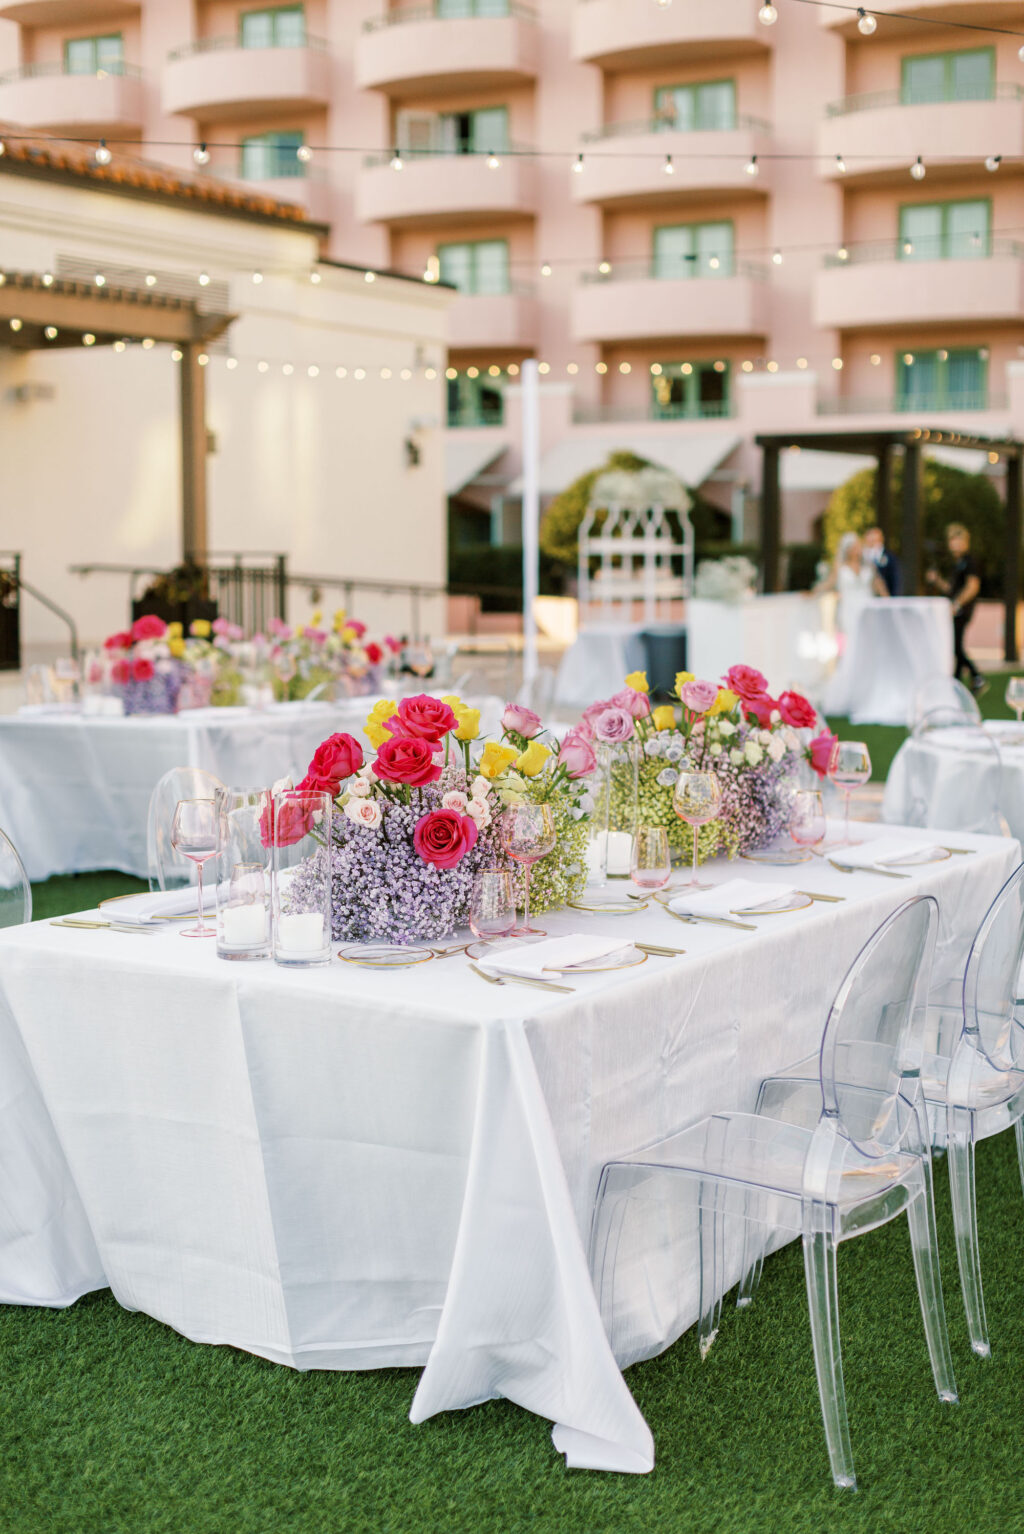 Romantic Spring Whimsical Reception Tablescape Ideas with Ombre Red and Purple Centerpieces and Ghost Chairs | Tampa Bay Florist Bruce Wayne Florals | Rentals Gabro Rental Services | Venue The Vinoy | Planners Parties a la Carte